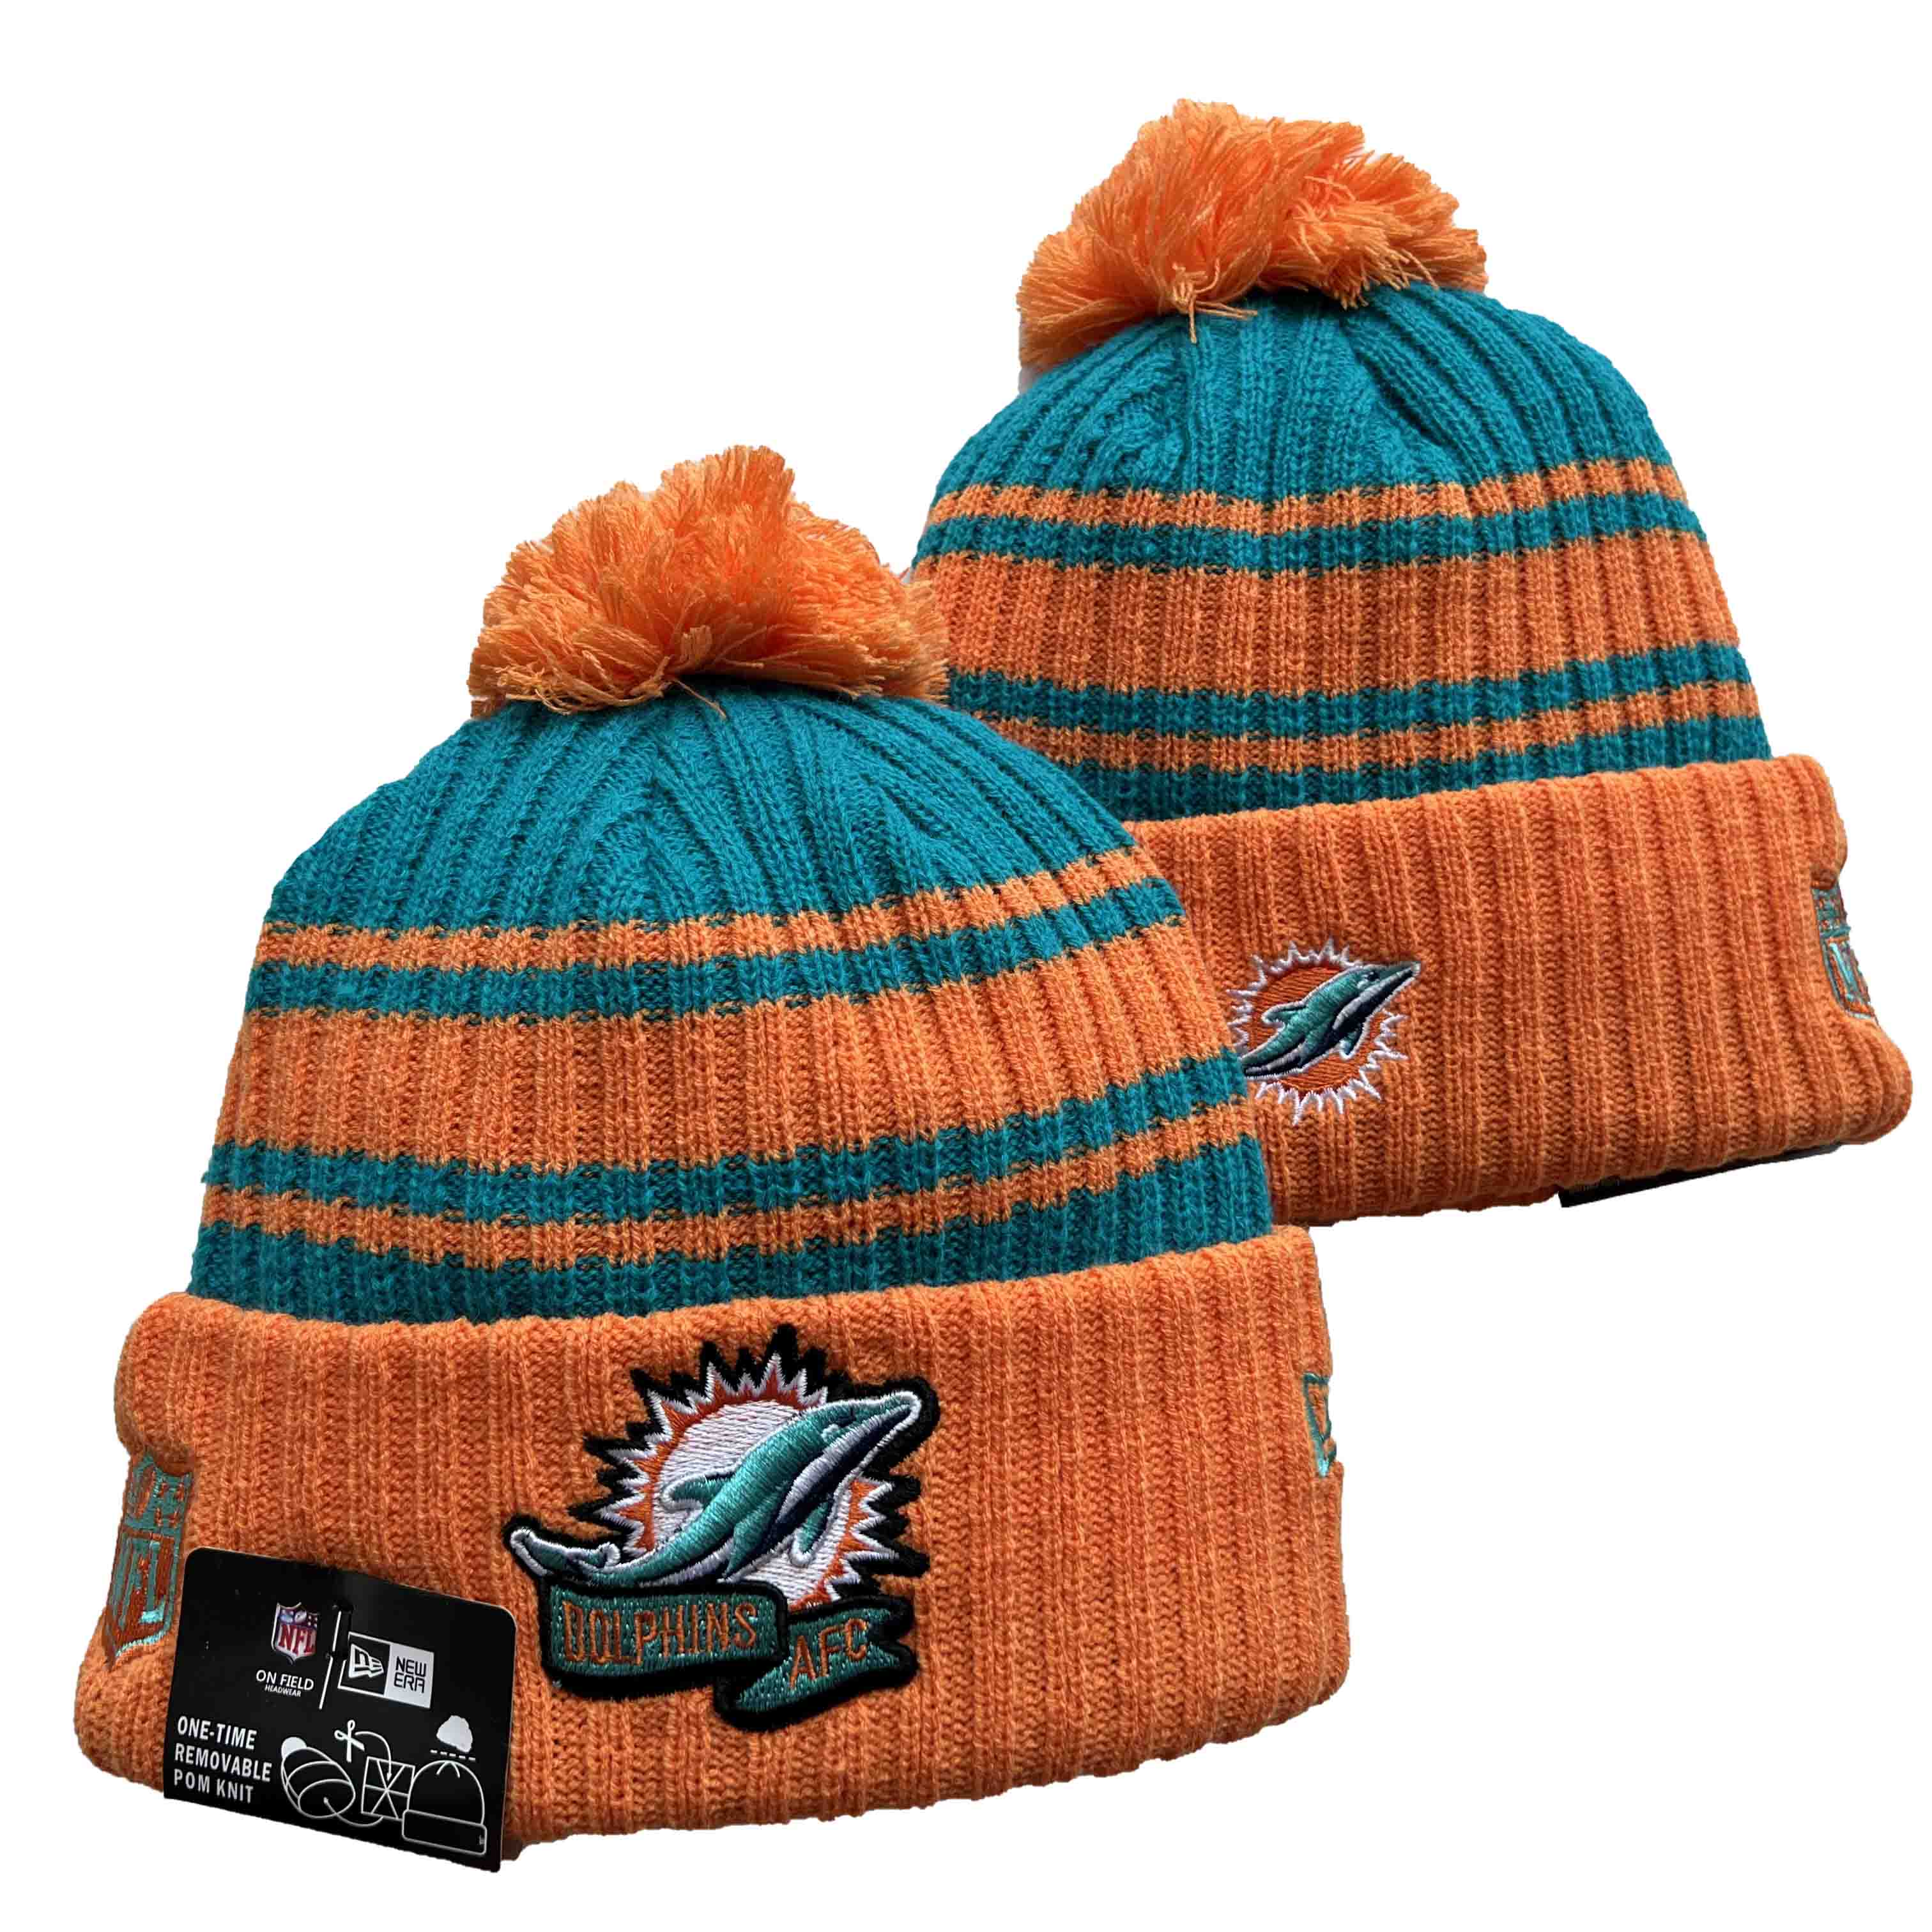 NFL Miami Dolphins Beanies Knit Hats-YD1032